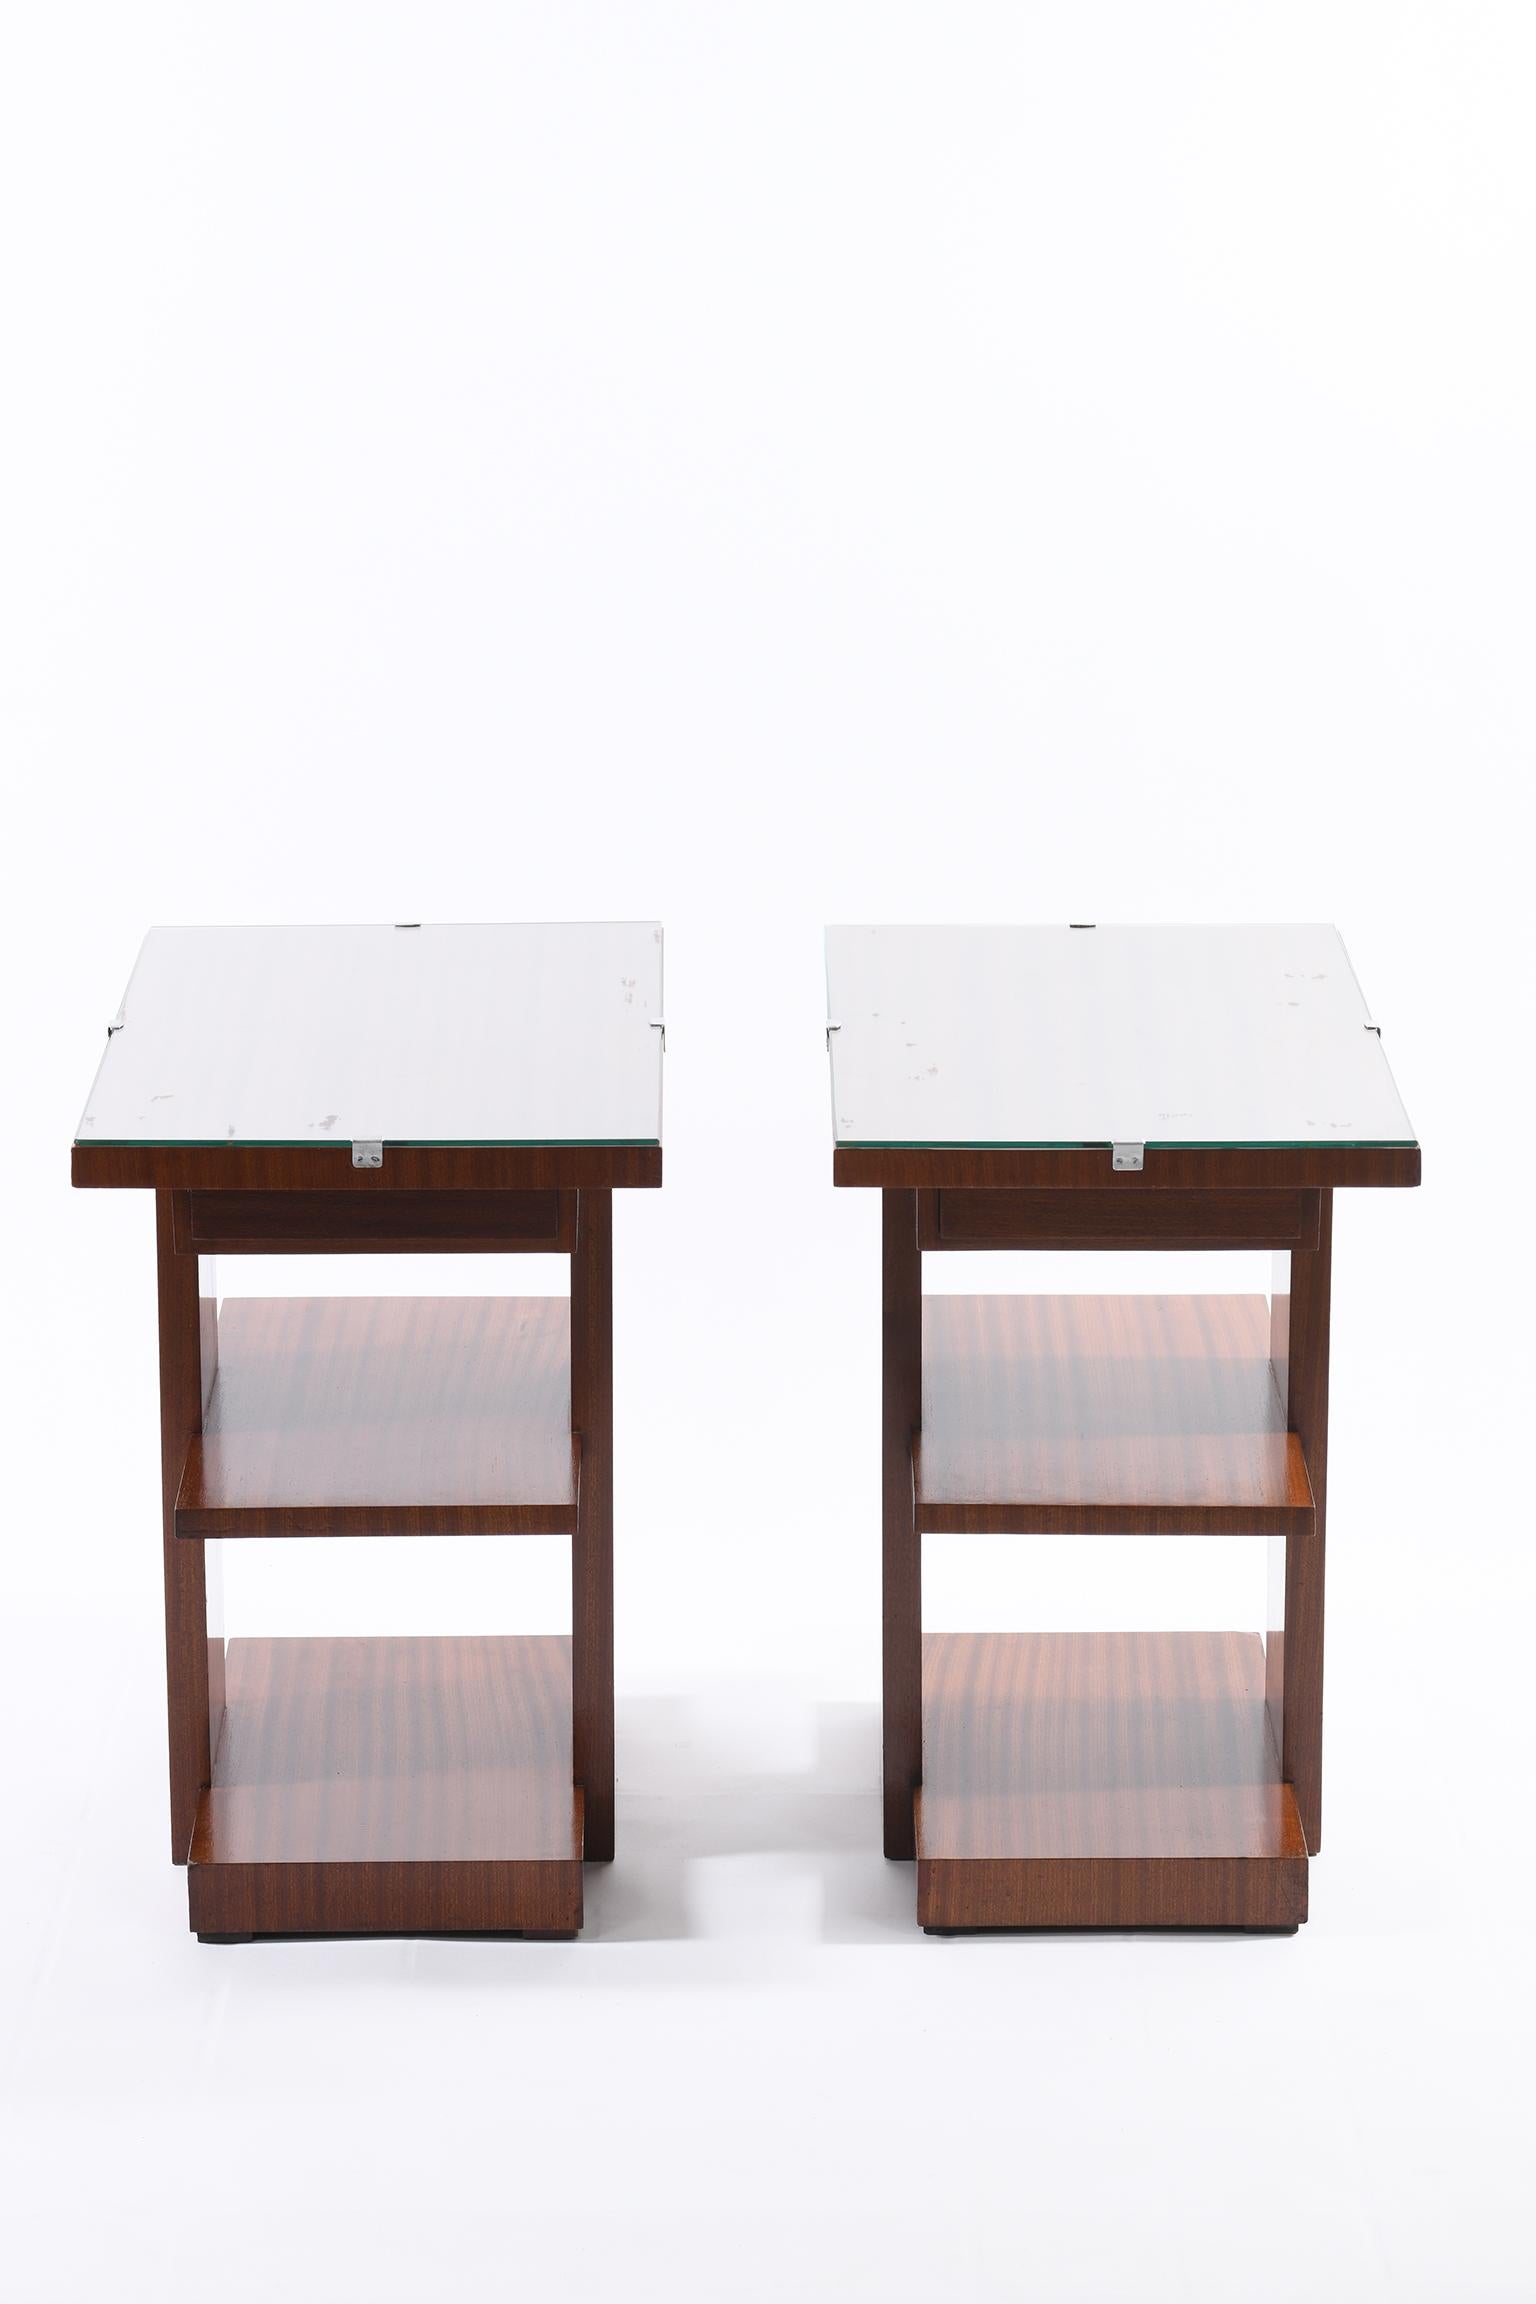 Wood Art Deco Pair of Side Table or Nightstands with a Drawer and Shelves